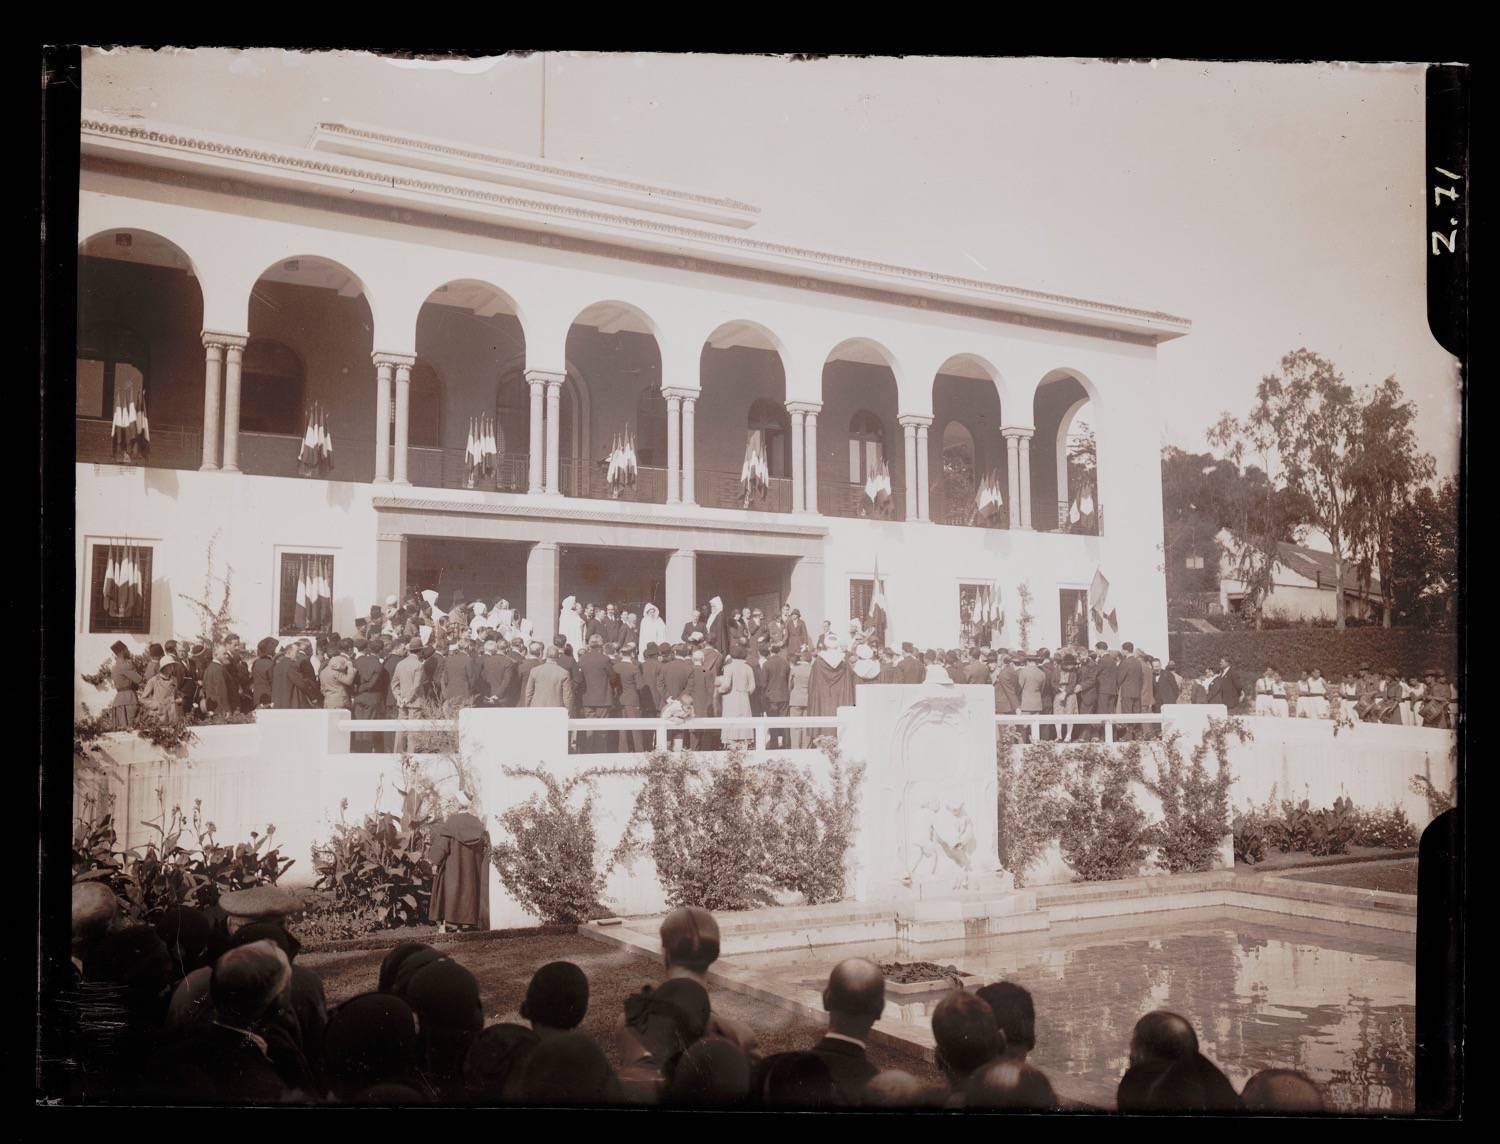 Exterior view of a gathering at the French Consulate